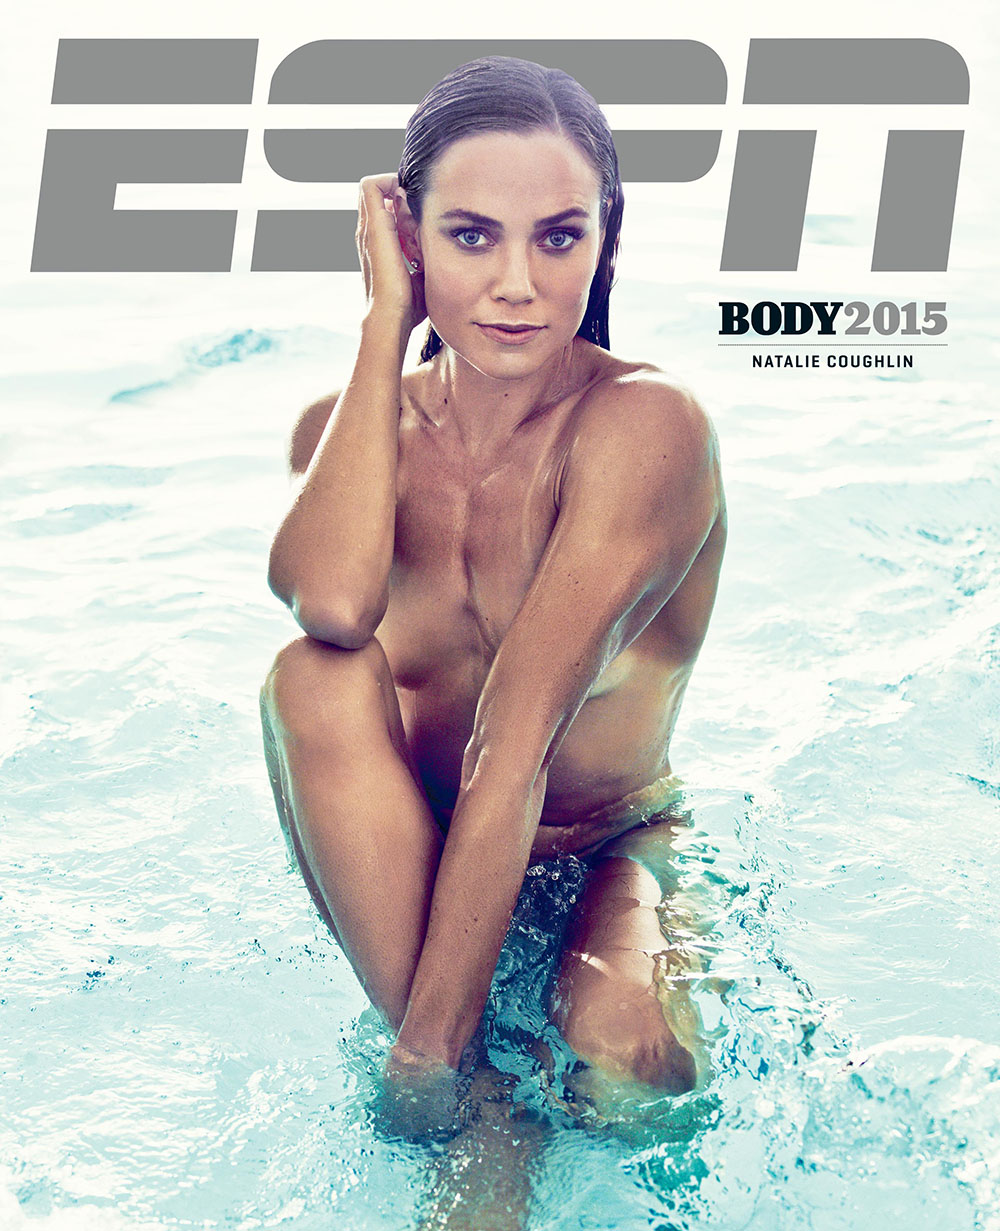 Photography News - Stunning sporty nudes by ESPN Natalie Coughlin photograp...